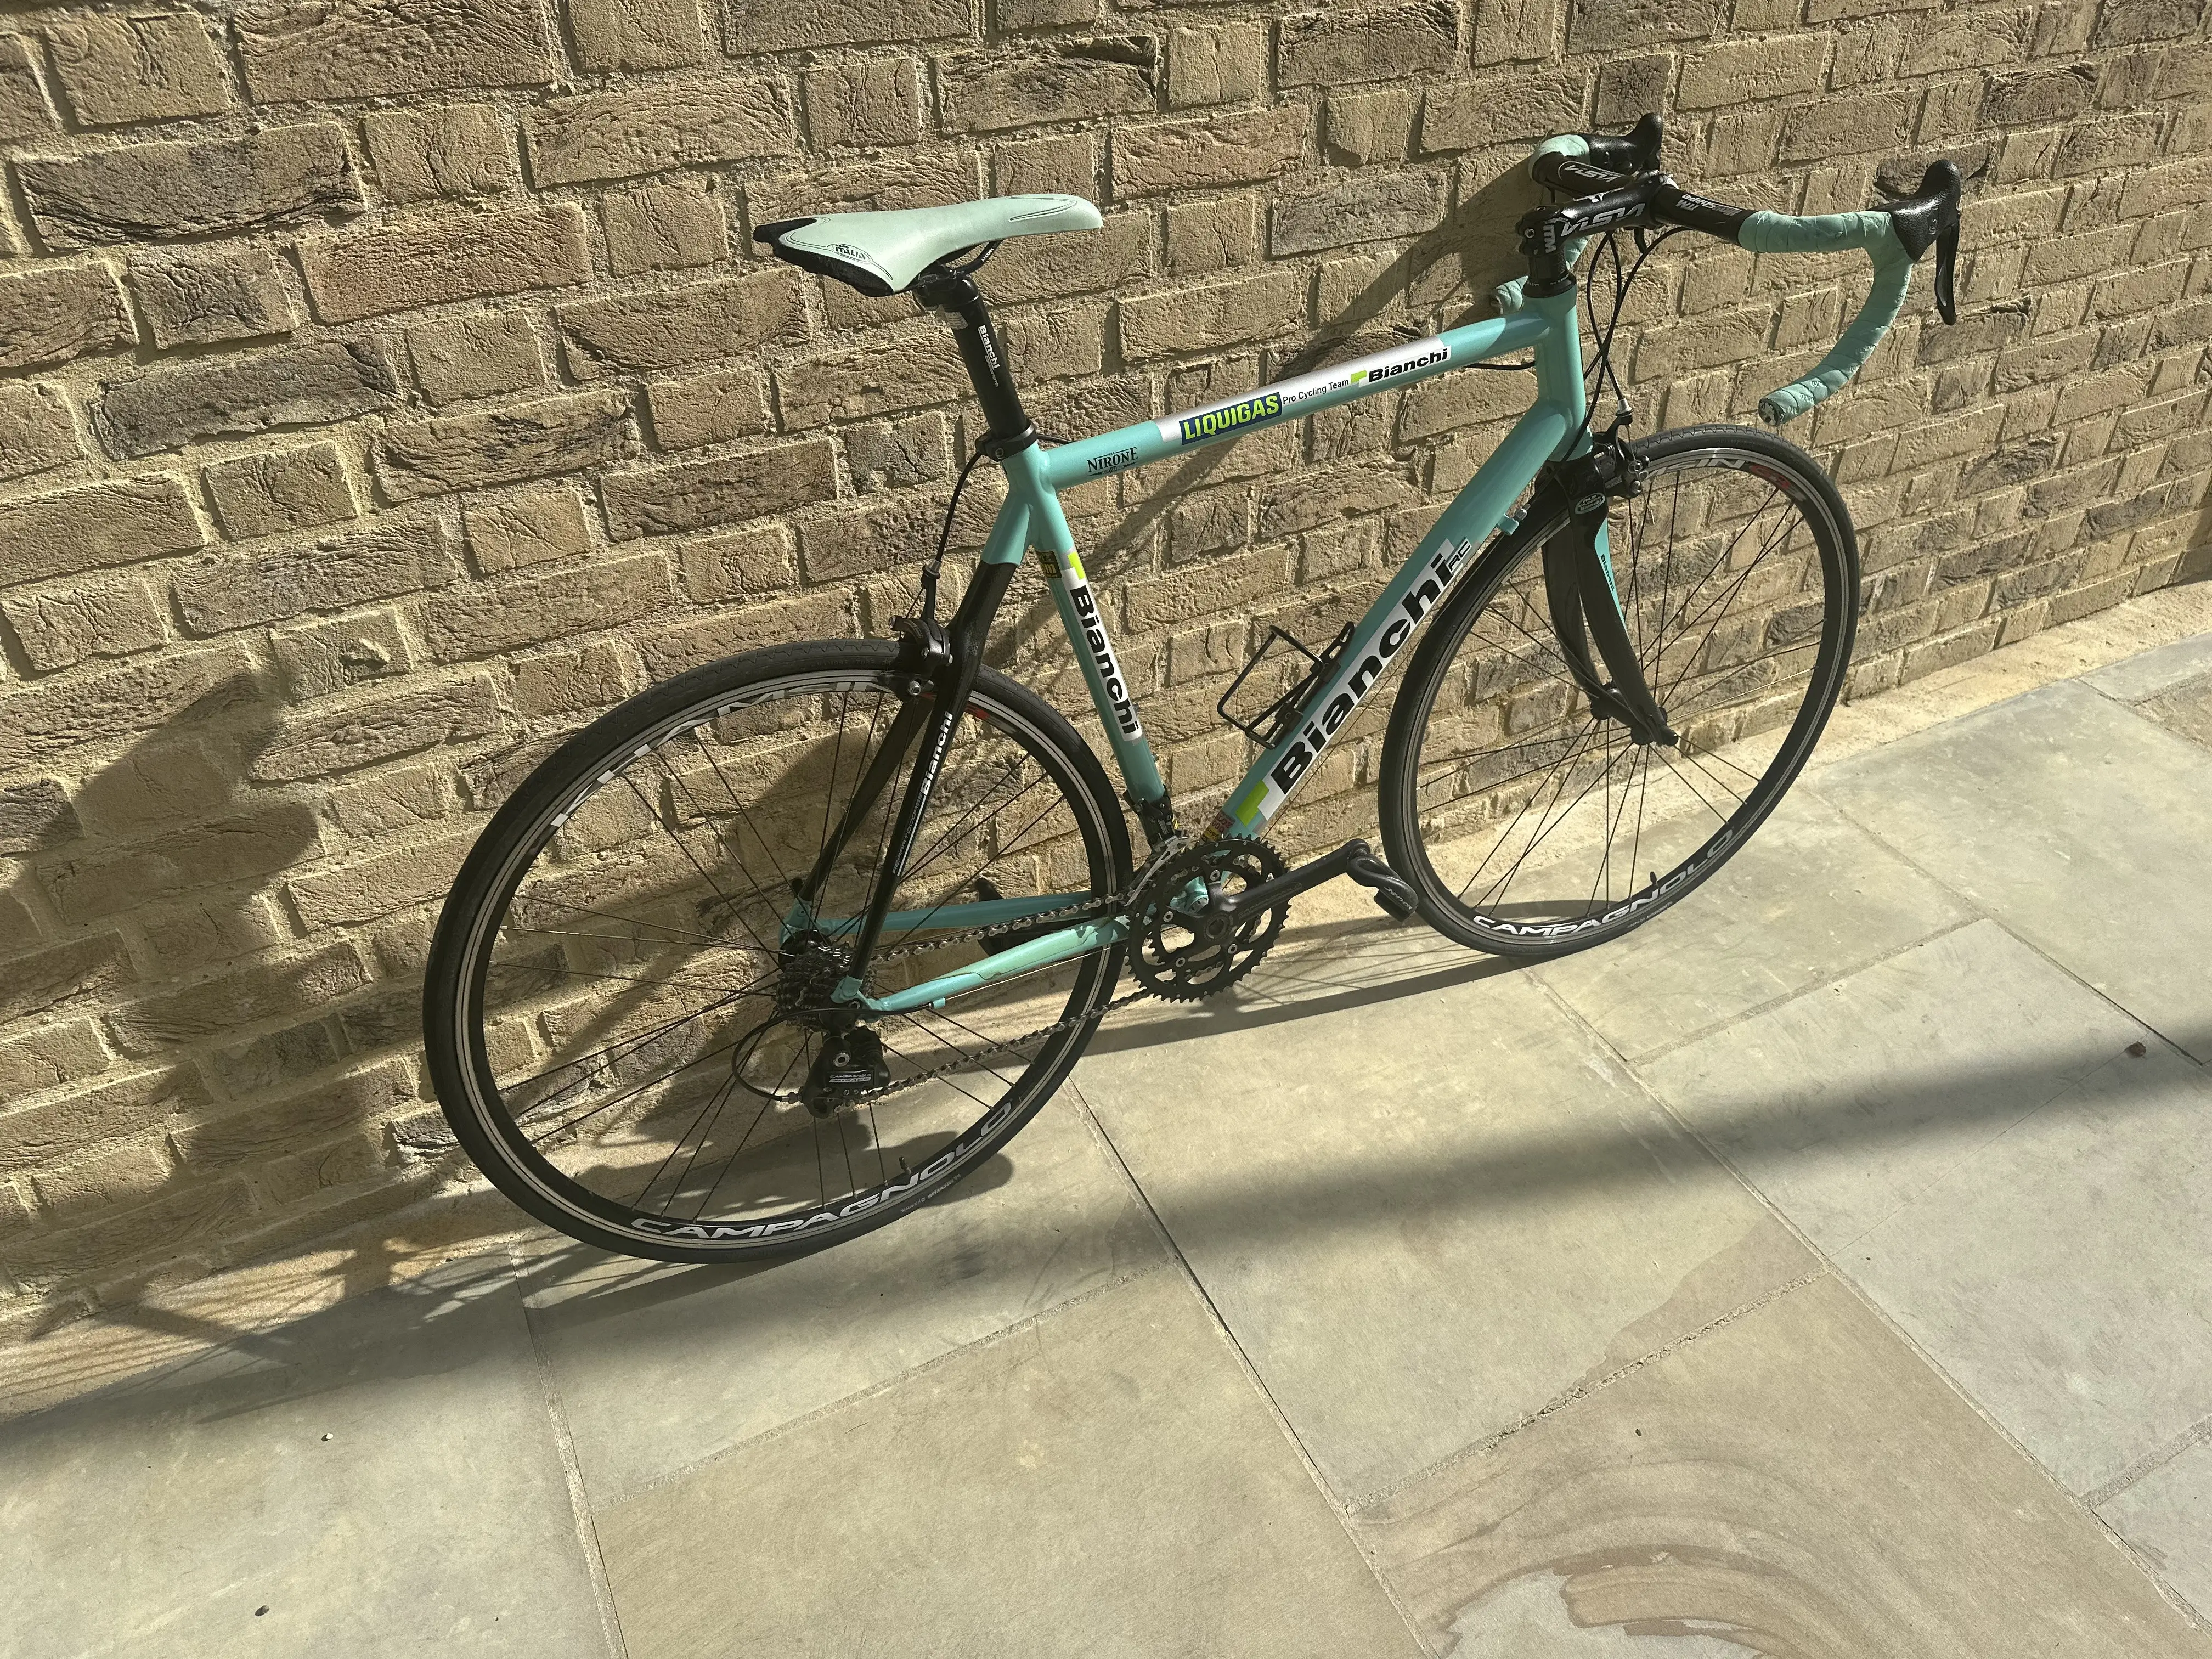 Bianchi Via Nirone 7 Team Liquigas Limited Edition used in